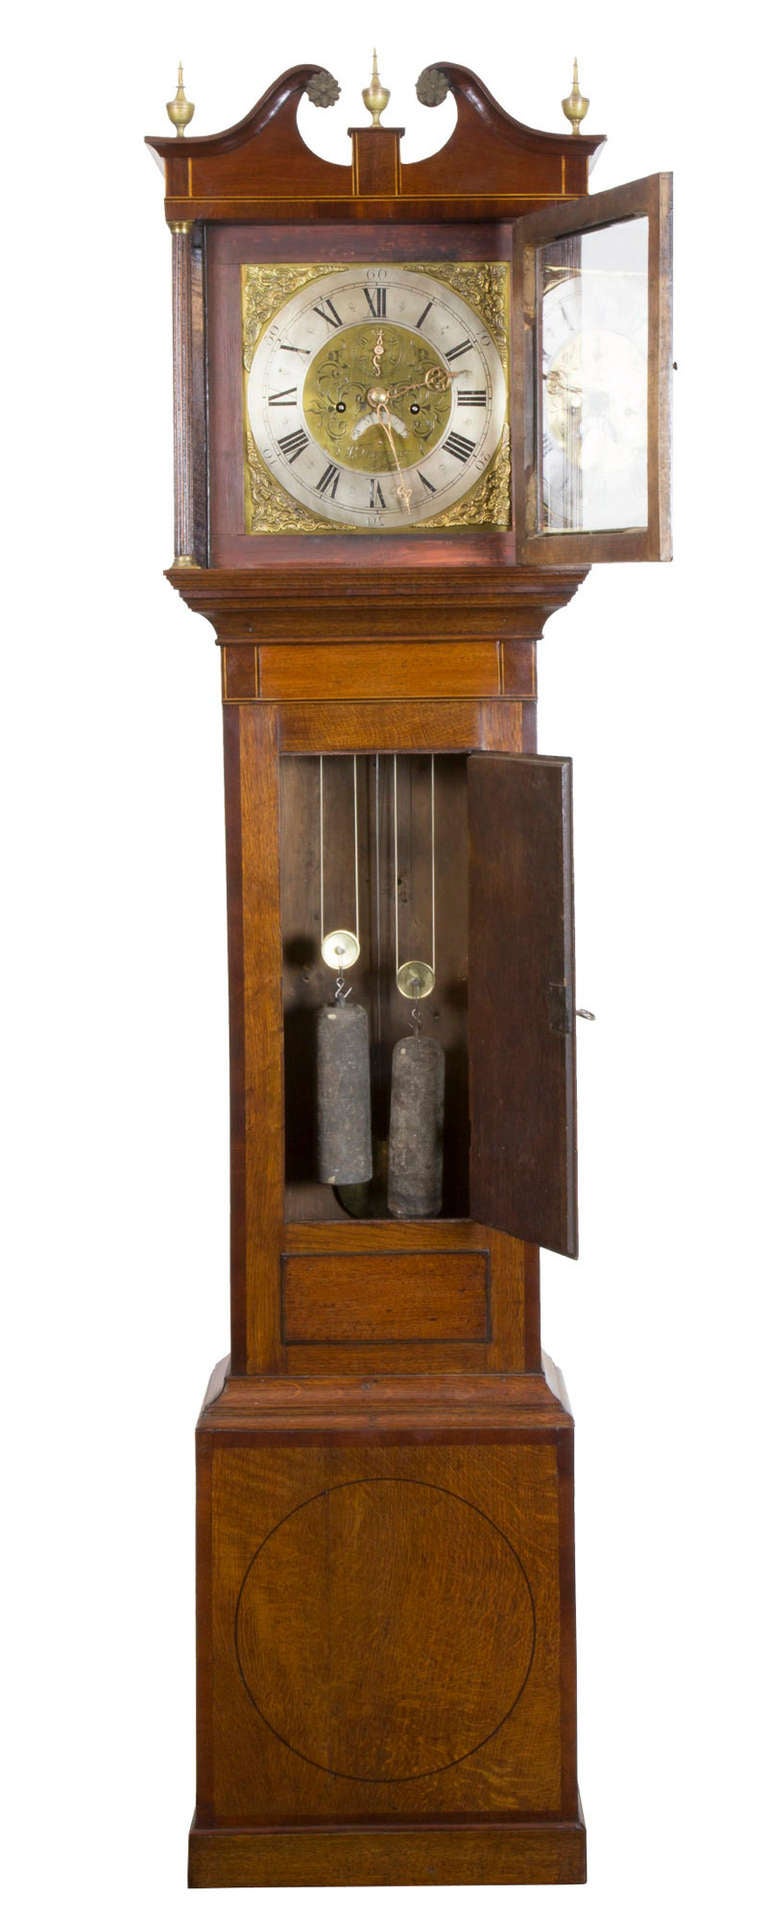 This is a small-scale clock with a lot going for it. Note the inlaid conch shell and the inlay work around the door. The inlay work is quite restrained but it's there throughout. Note the swan neck pediment with original old brass rosettes. The